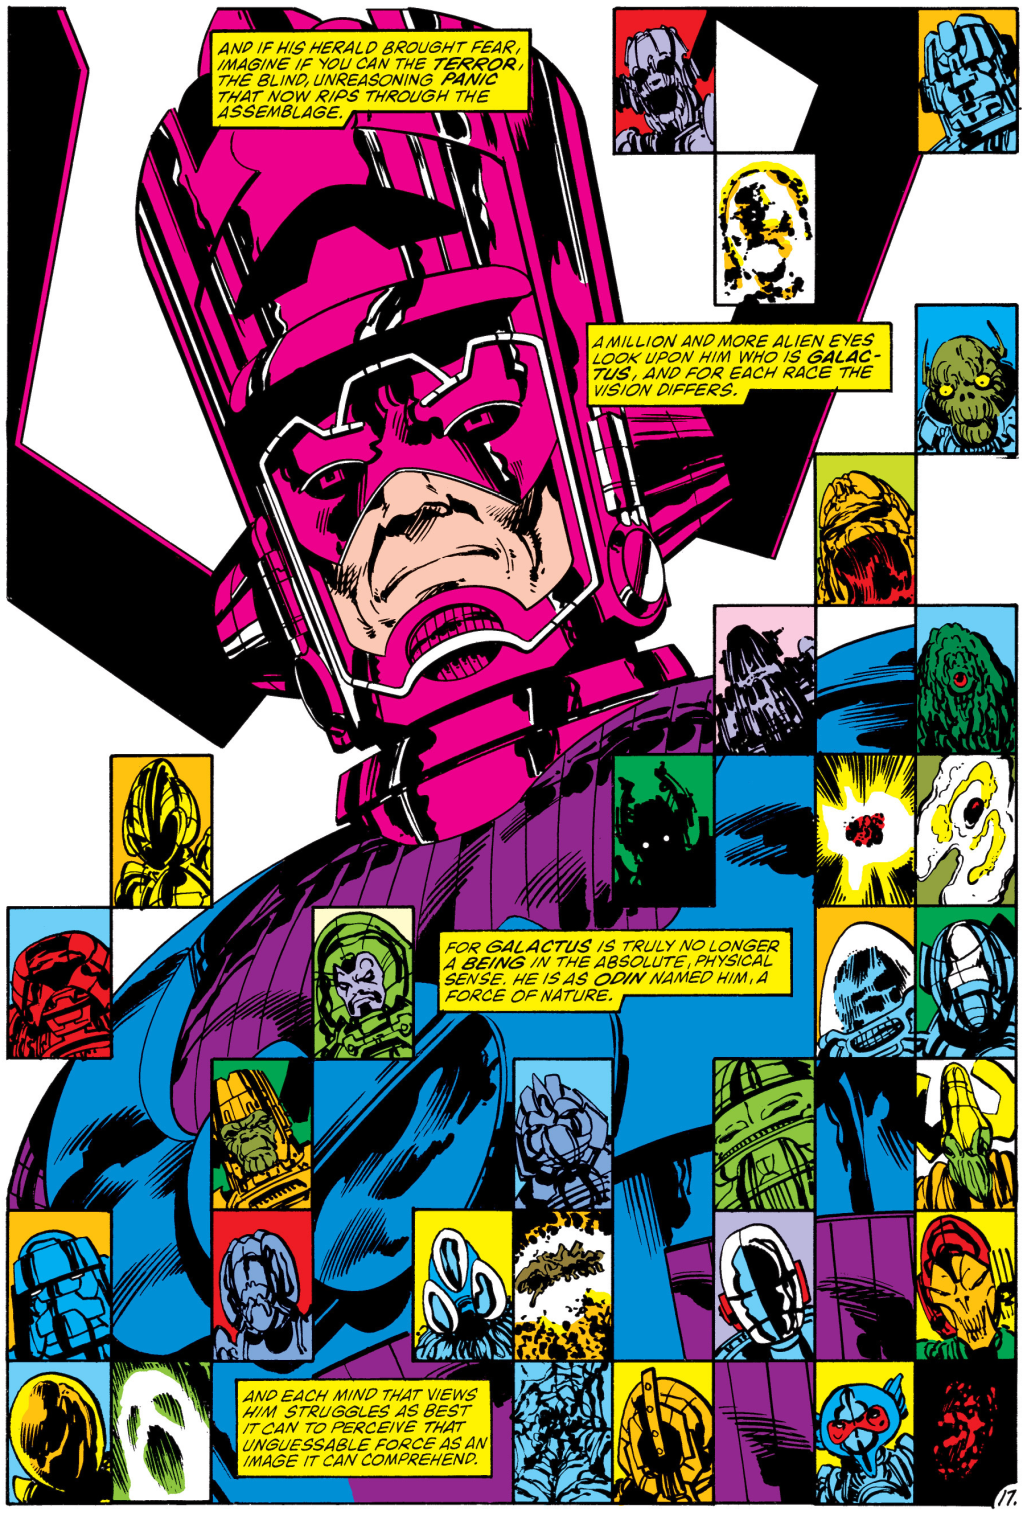 Galactus appears before the Shi'ar Magistrate in defense of Reed Richards in Fantastic Four Vol. 1 #262 "The Trial of Reed Richards" (1983), Marvel Comics. Words by John Byrne, art by John Byrne, Glynis Wein, and Jim Novak.